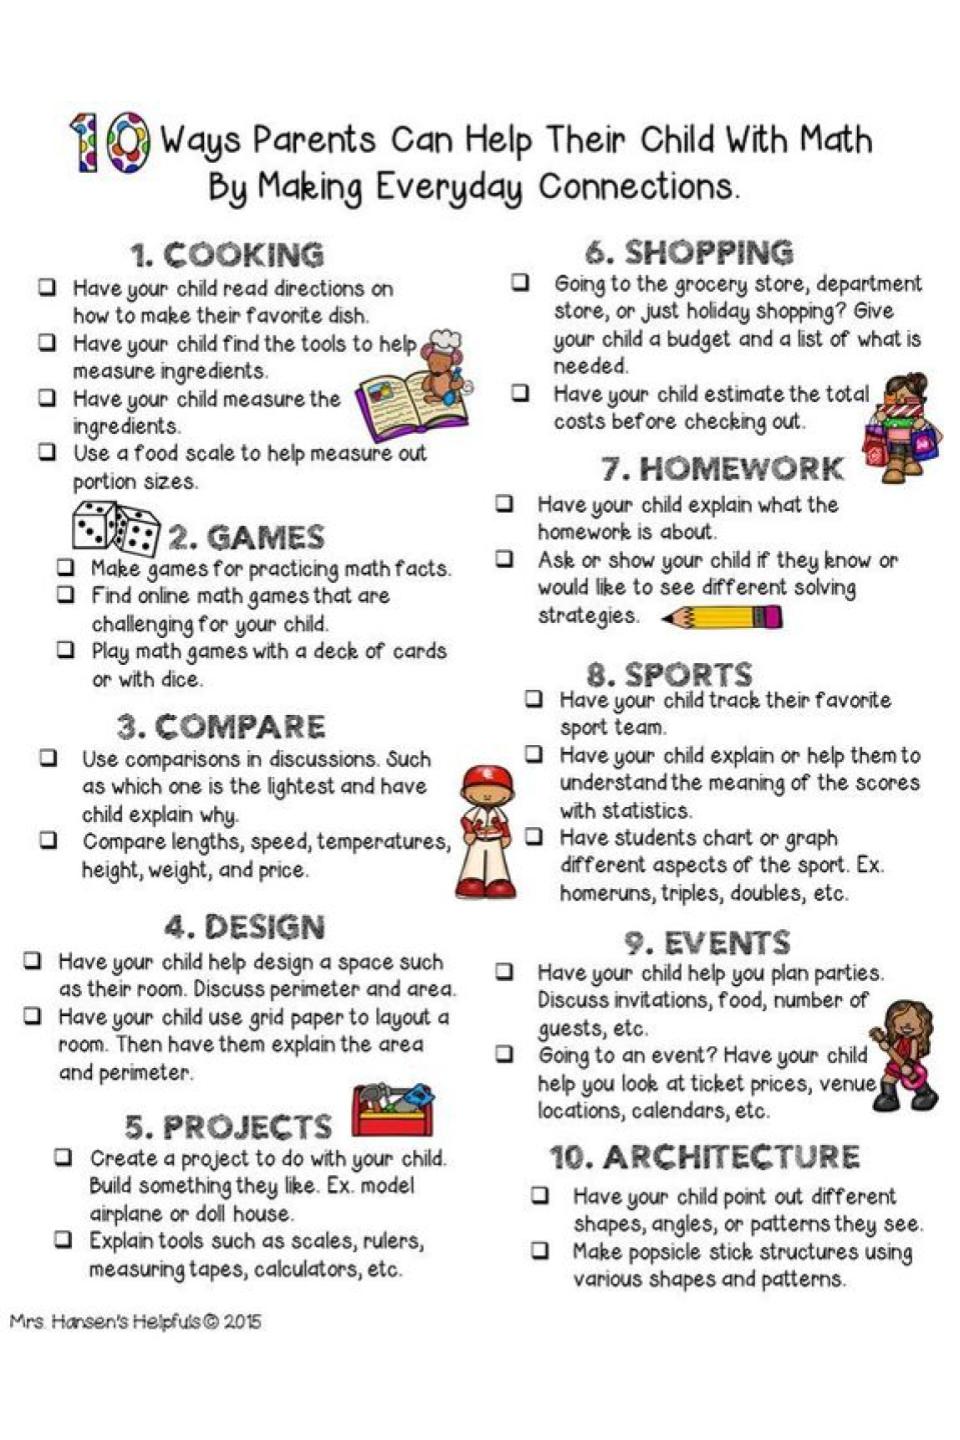 10 ways for parents to help their kids